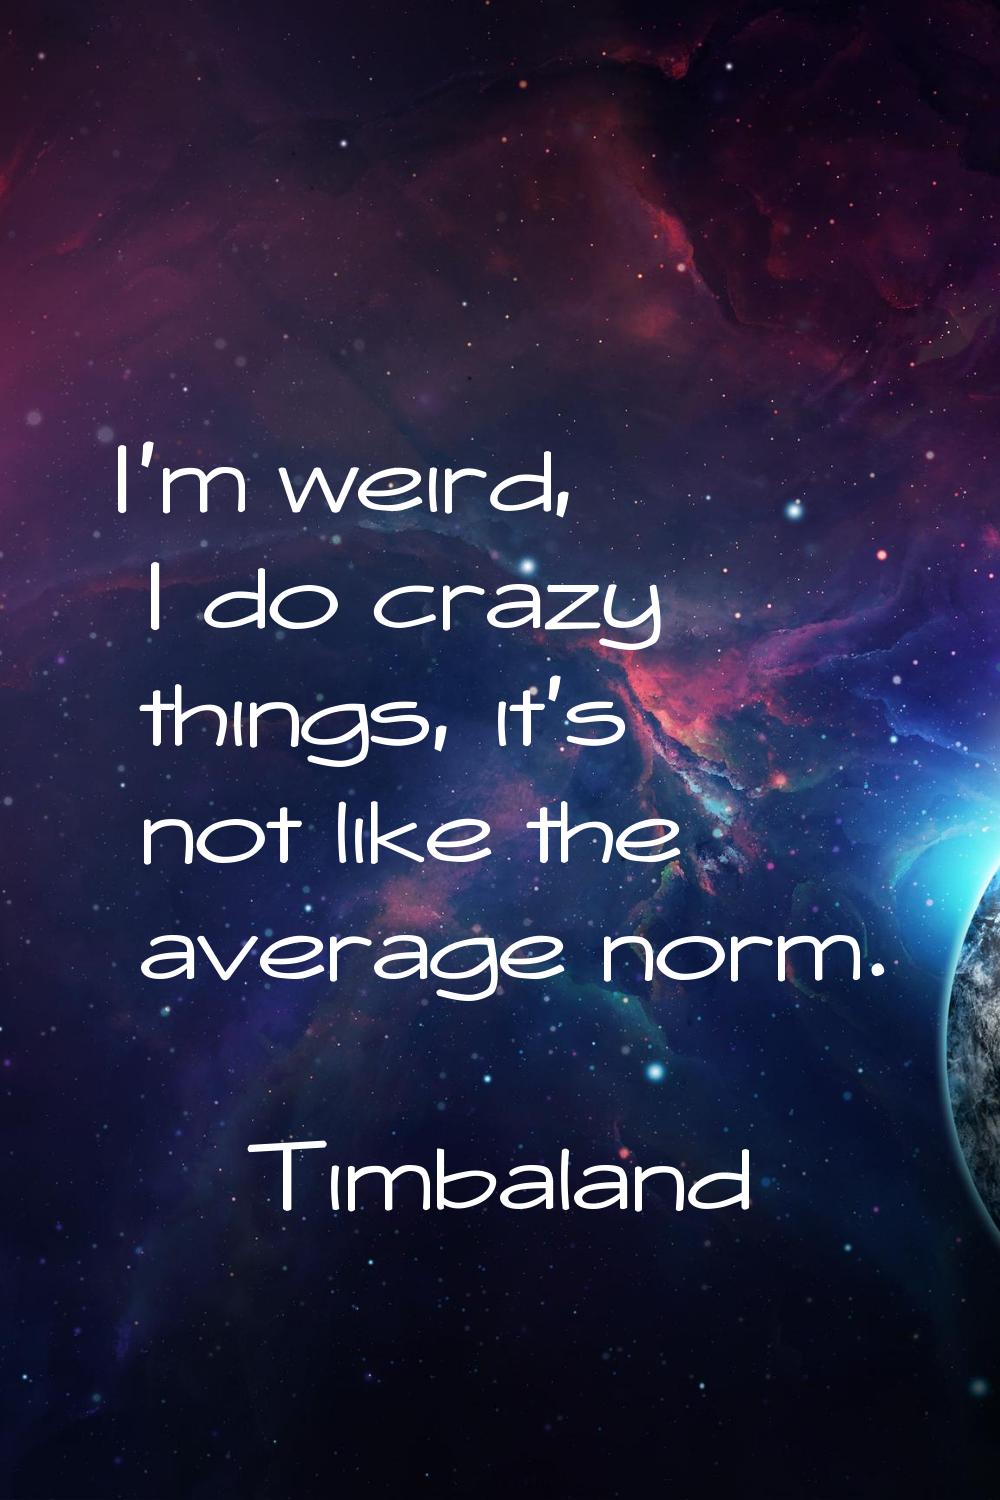 I'm weird, I do crazy things, it's not like the average norm.